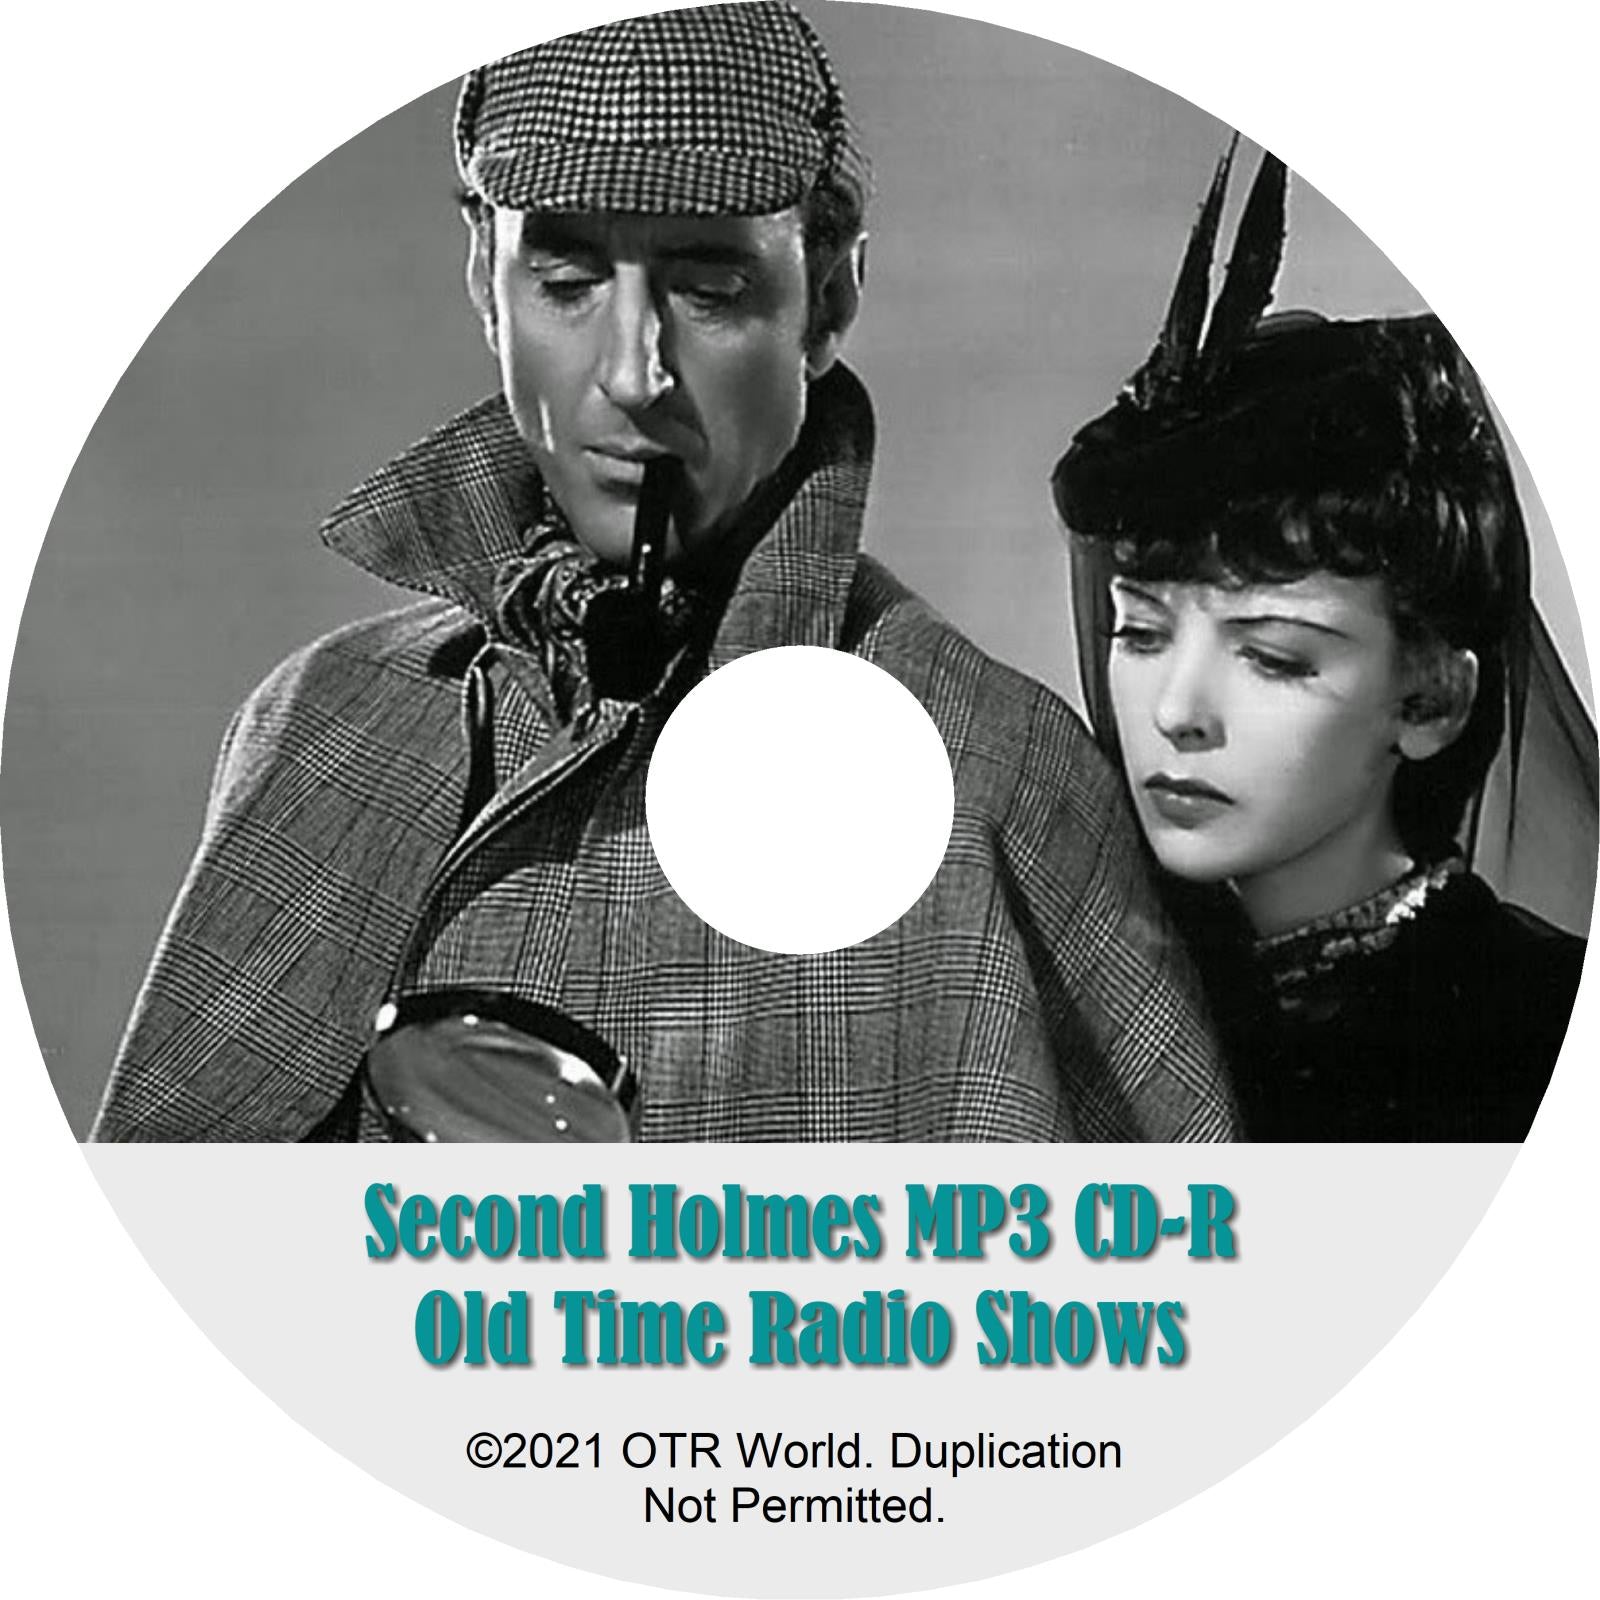 Second Holmes OTRS OTR Old Time Radio Shows MP3 On CD-R 6 Episodes